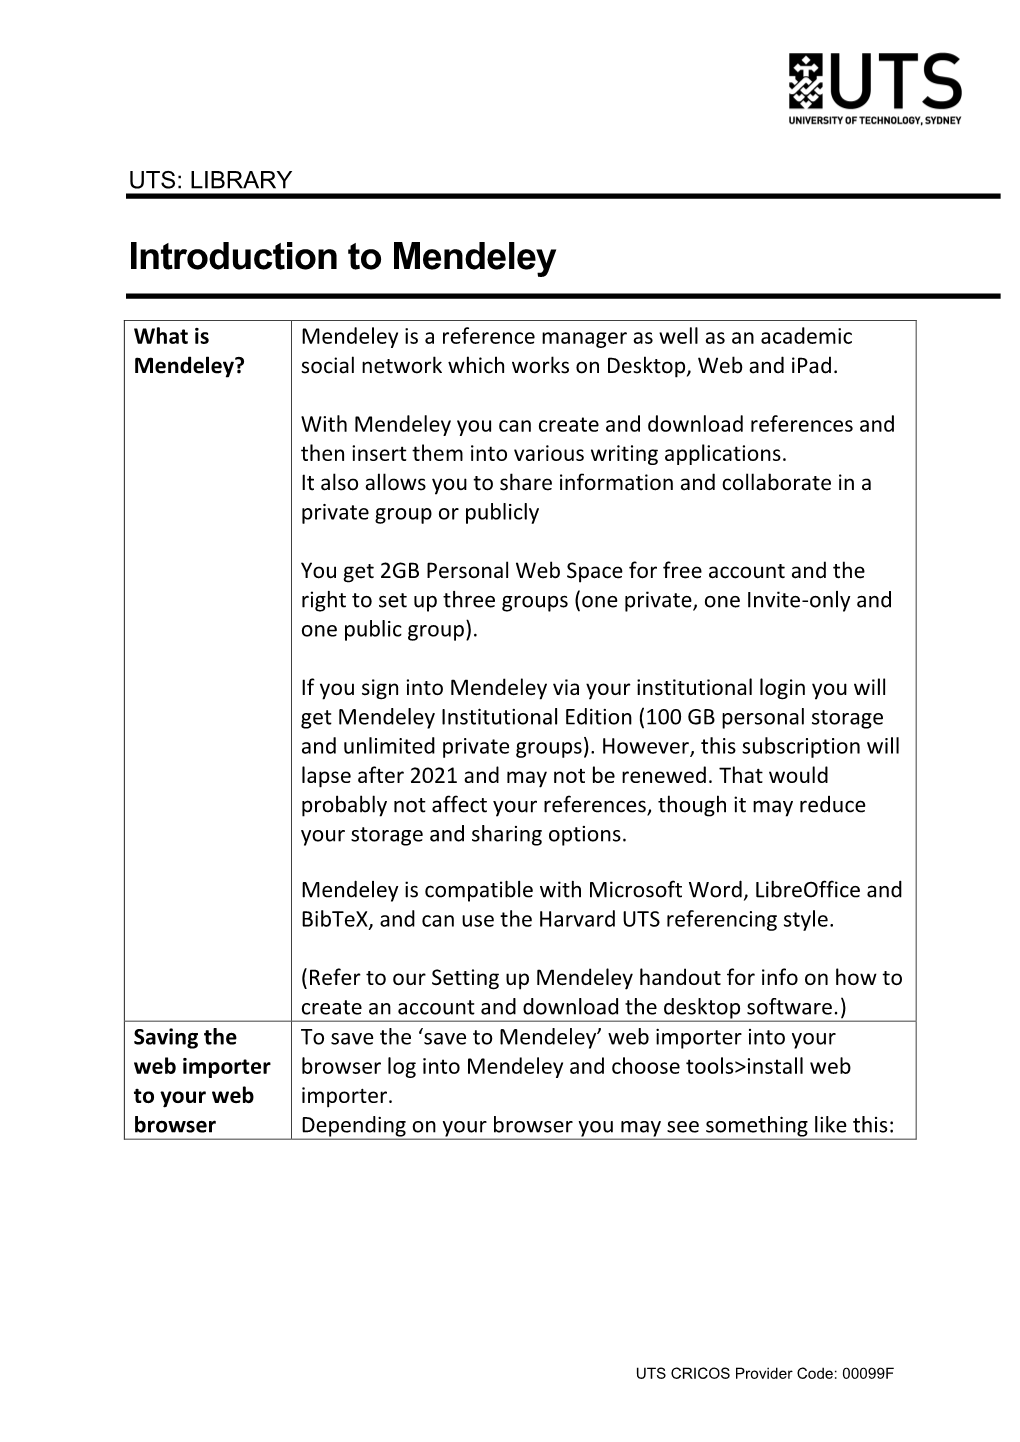 Introduction to Mendeley